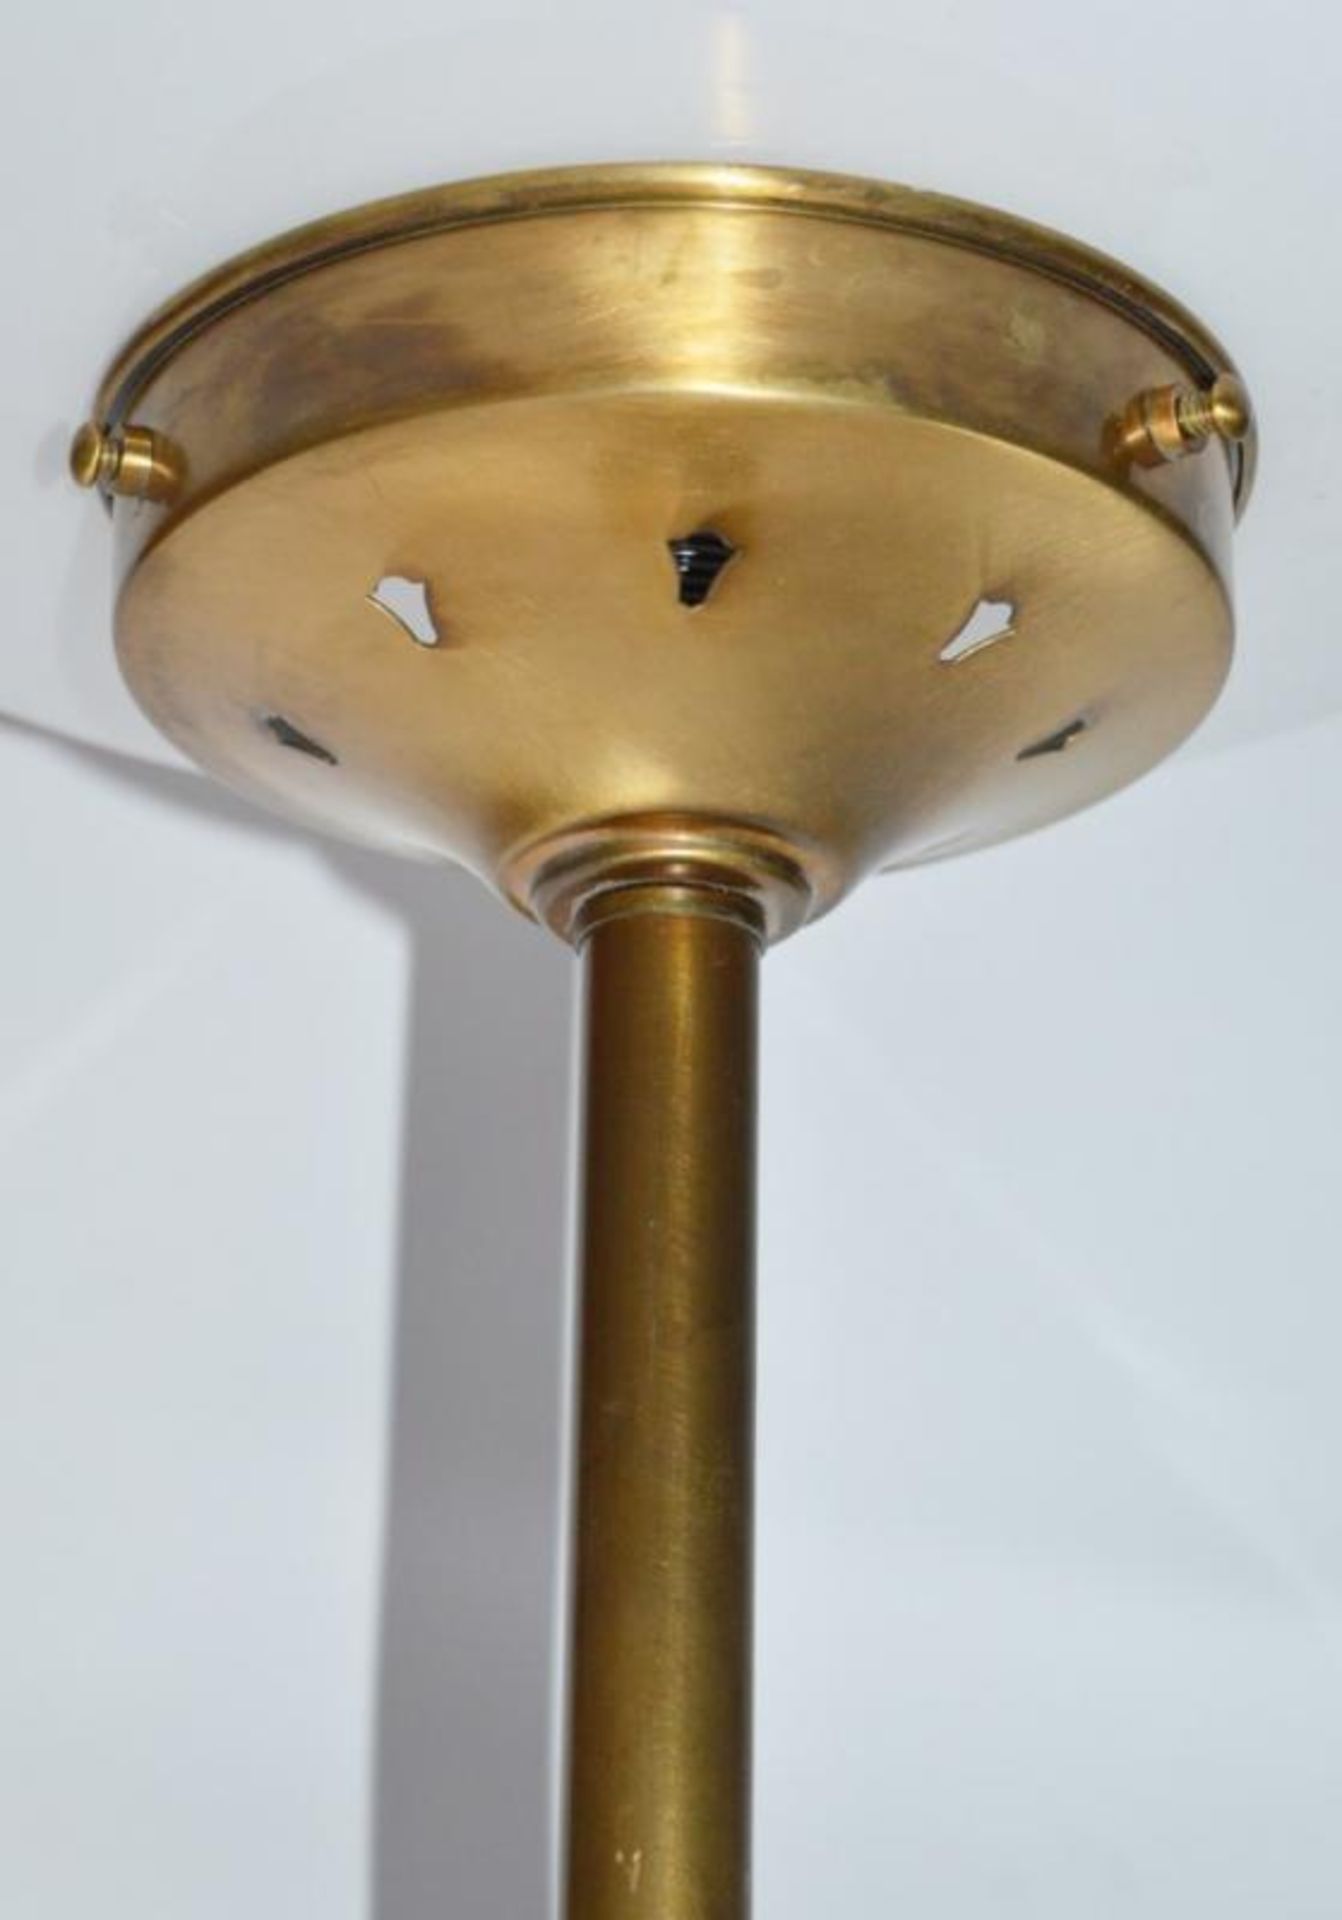 4 x Art Deco Style Ceiling Lights With Brass Bases and White Opal Glass Shades - Recently Removed Fr - Image 11 of 11